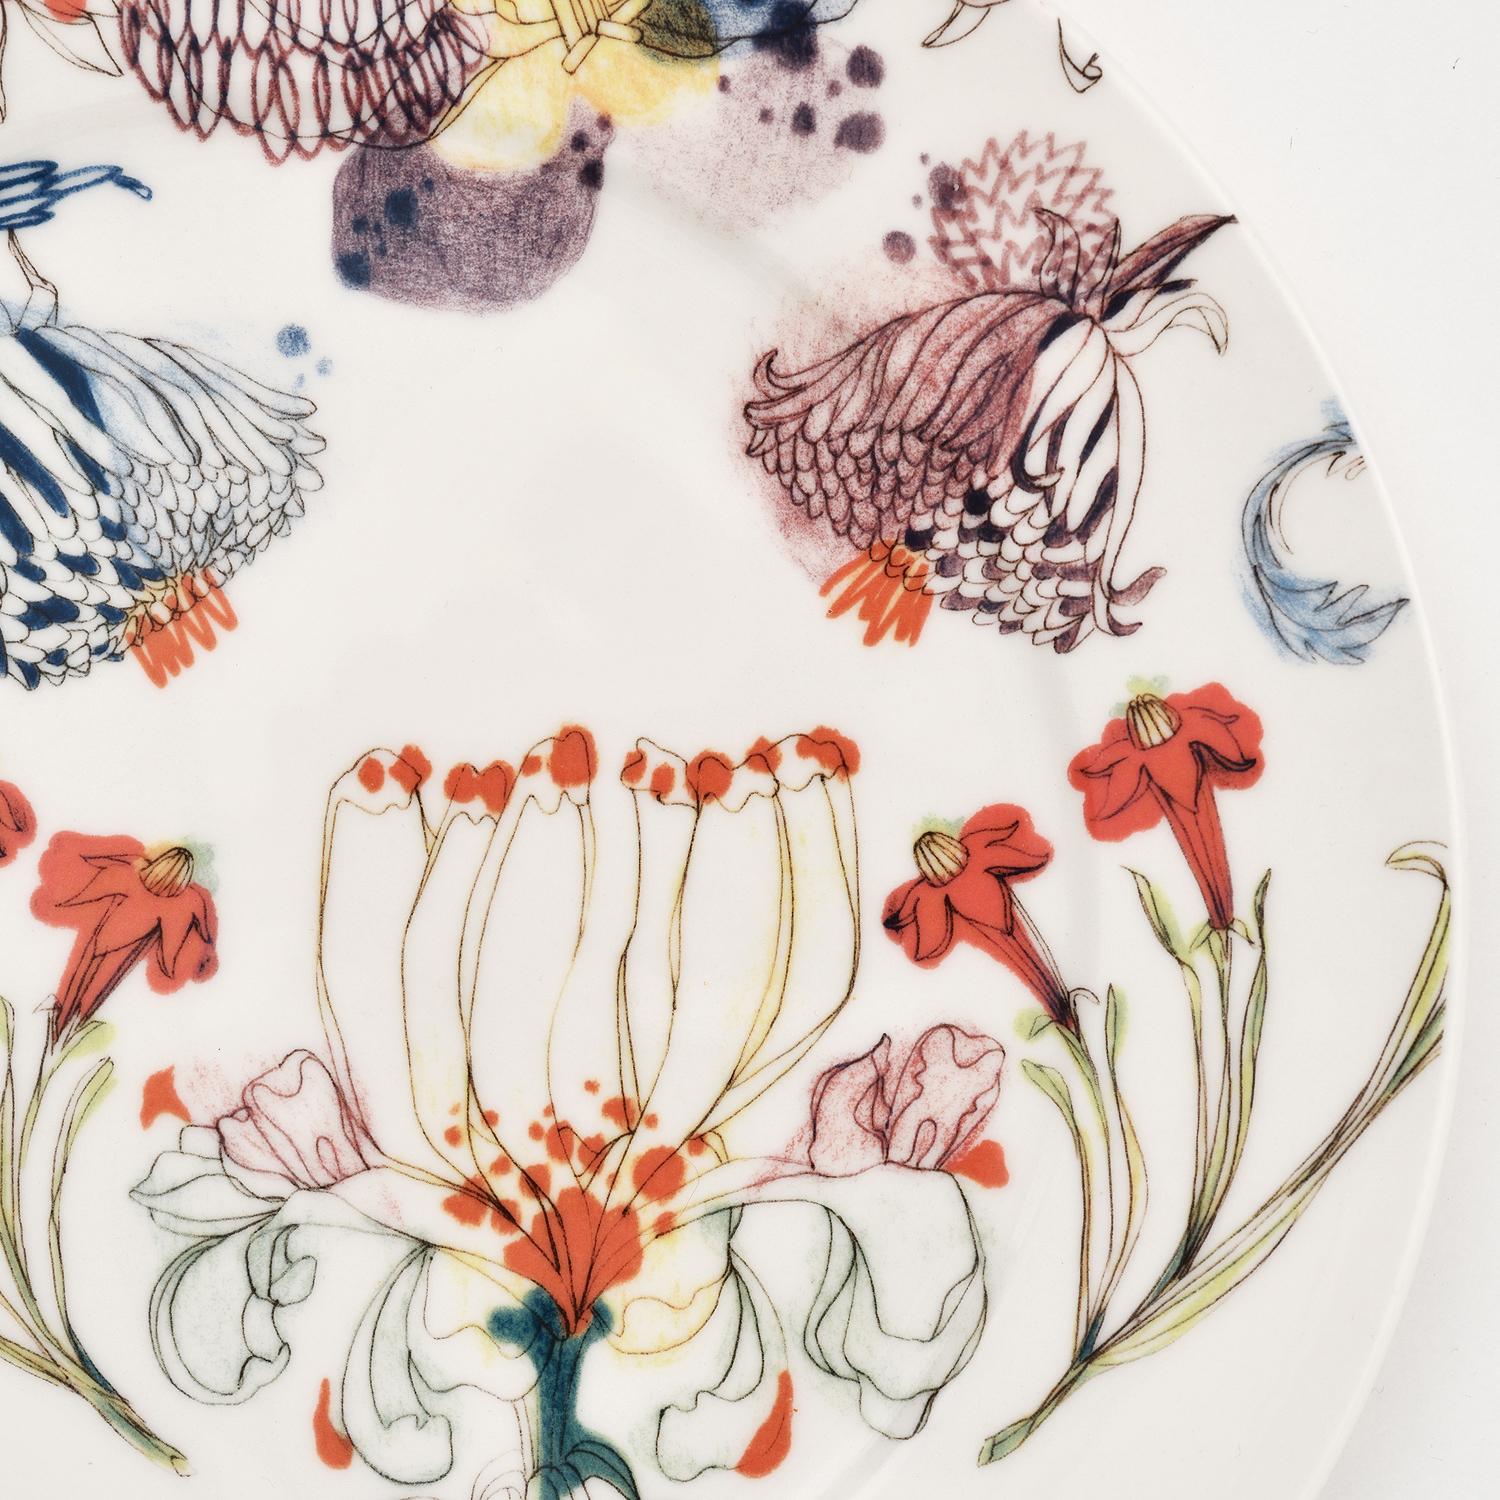 Belonging to the Grandma's Garden porcelain series, the design of this dinner plate represents a sophisticated and elegant floral designs full of blossoms and buds with delicate colors blending together for a fresh and contemporary look, typical of